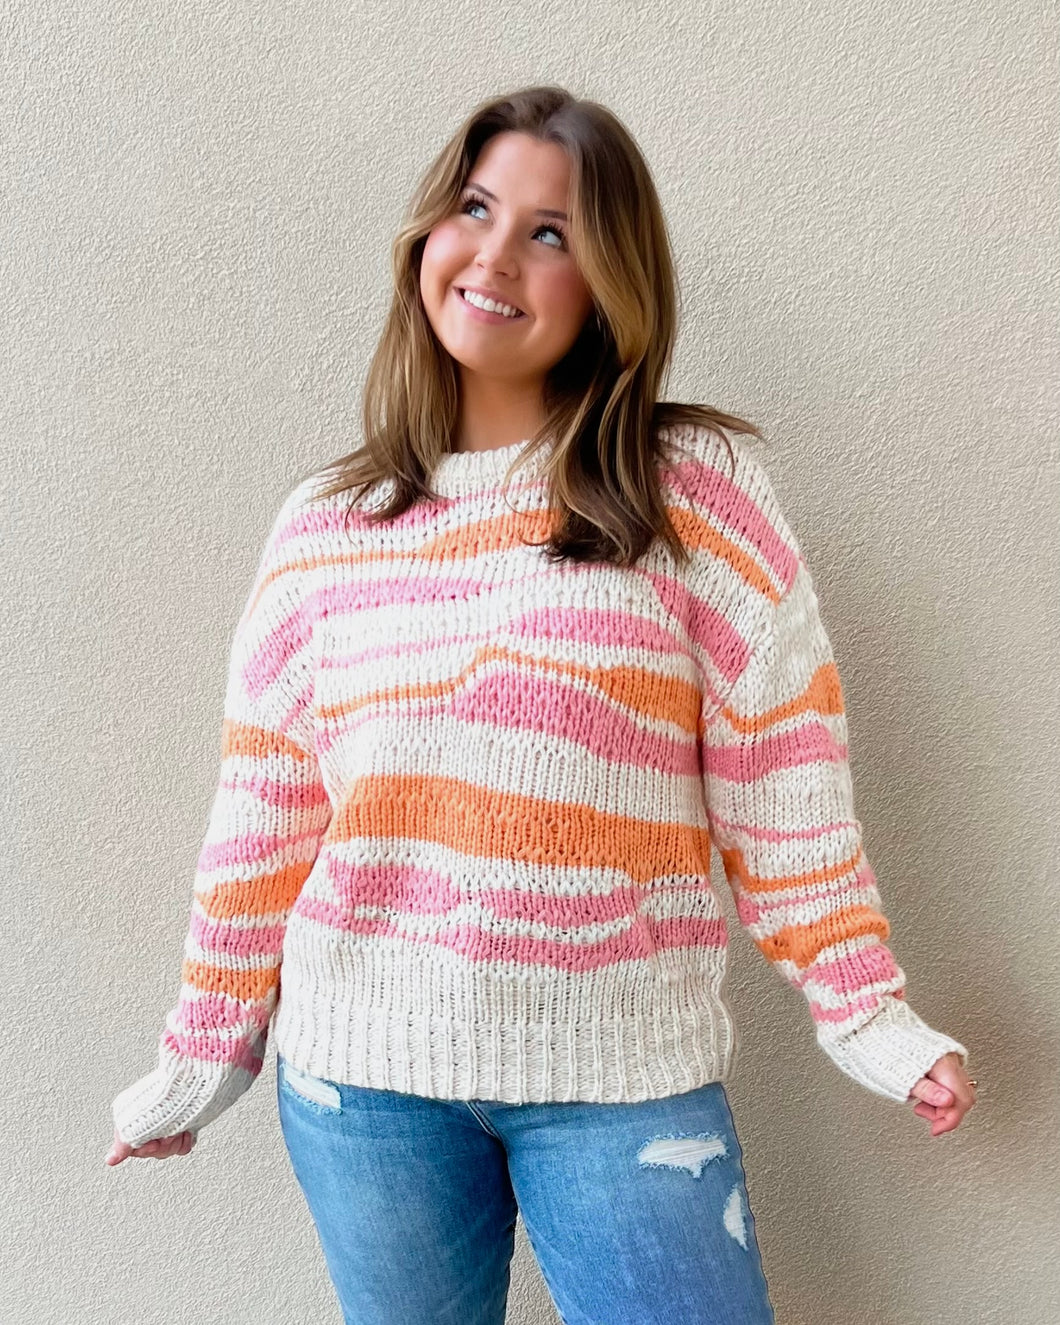 Spring Forward Knit Sweater